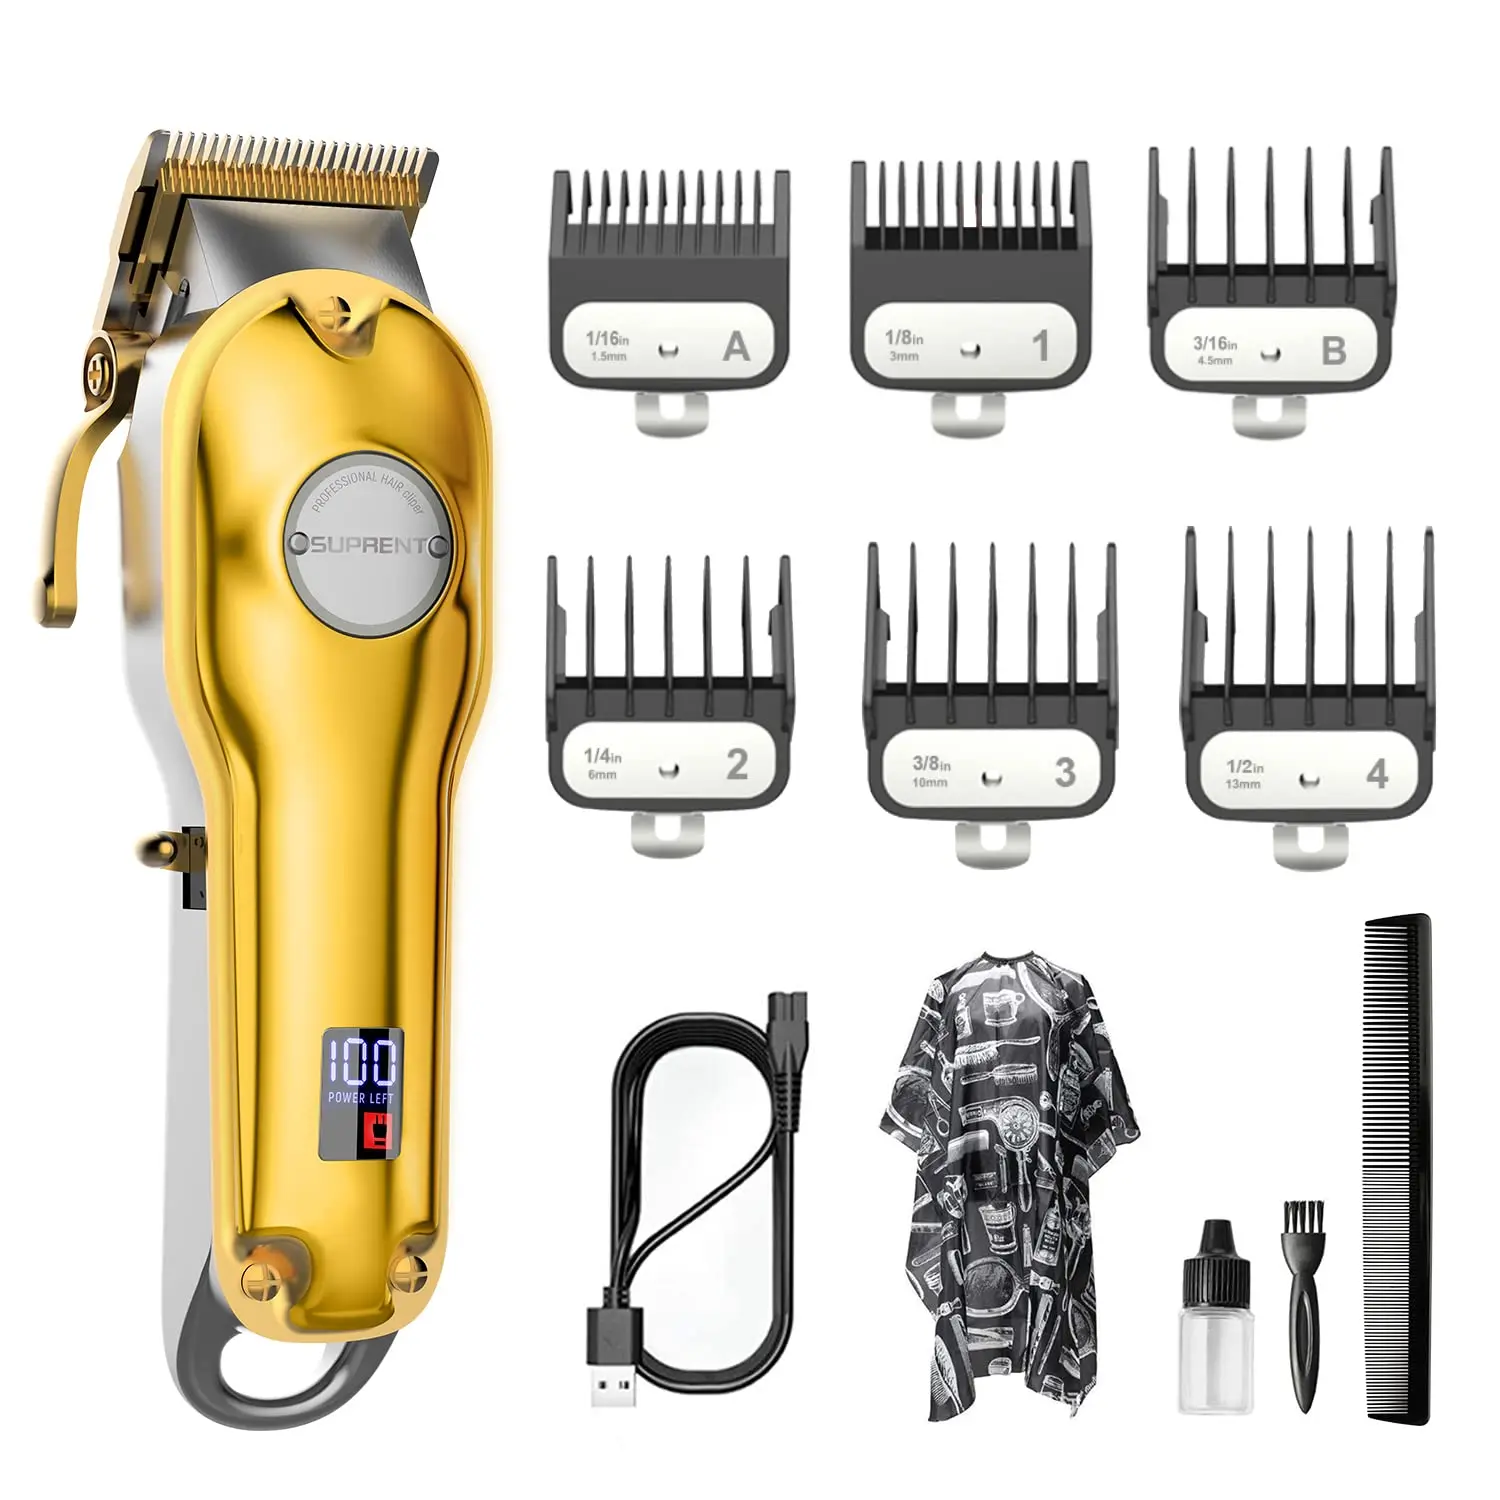 Hair Clippers For Professional Cordless Clippers For Cutting With 6 Durable Metal Guide Combs Trimmer - Buy Hair Clippers,Cordless Clippers,Hair Trimmer Product on Alibaba.com